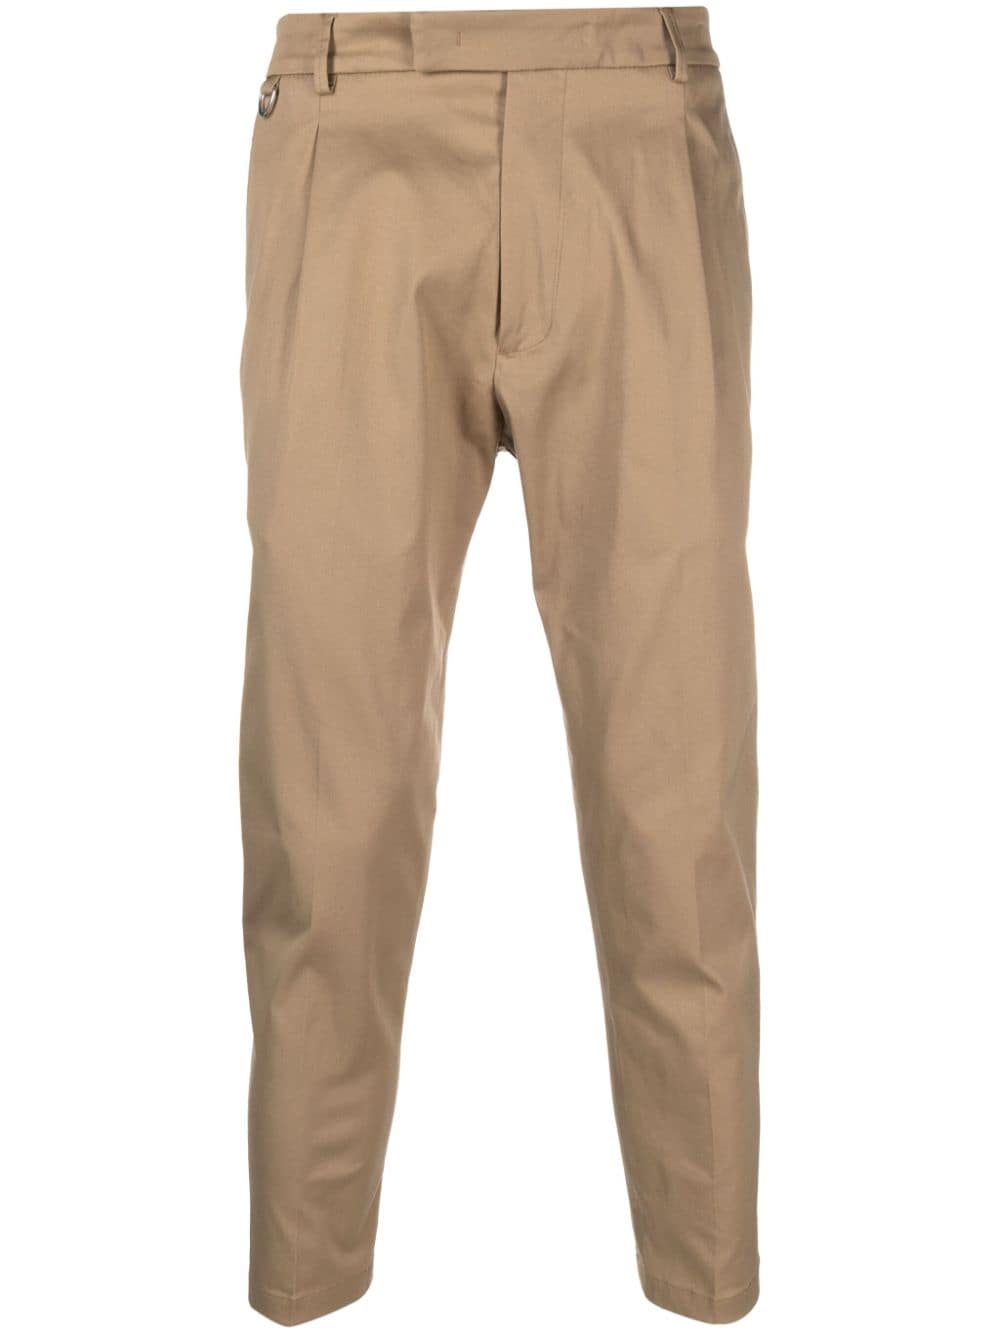 Low Brand Pants In Camel Cotton